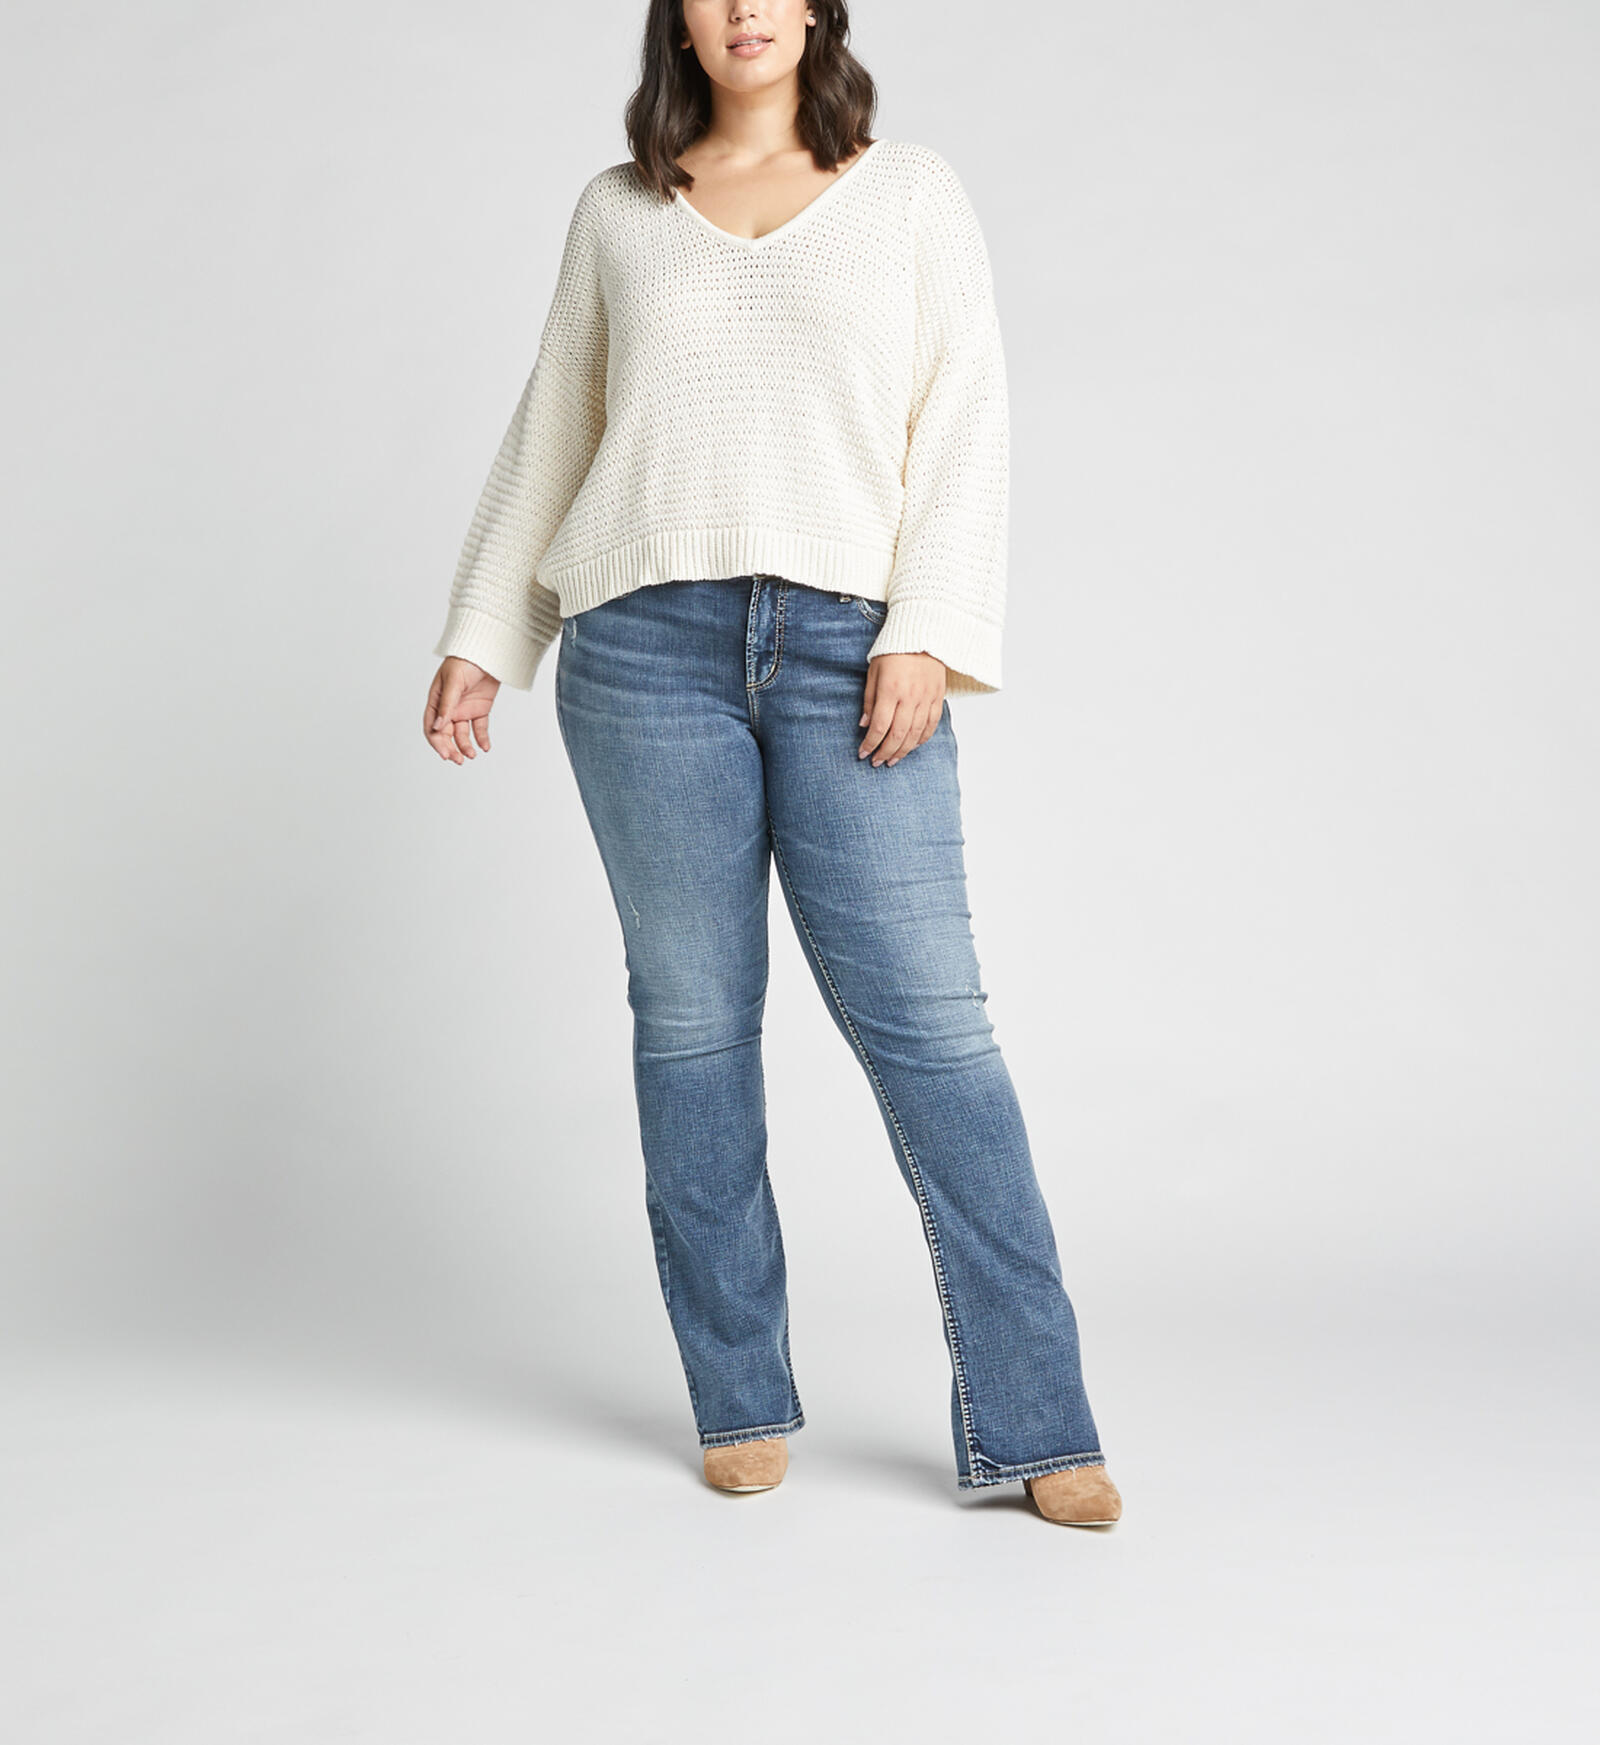 Silver Jeans Co.® Elyse Curvy Mid Rise Luxe Stretch Thick Stitch Cropped  Jean